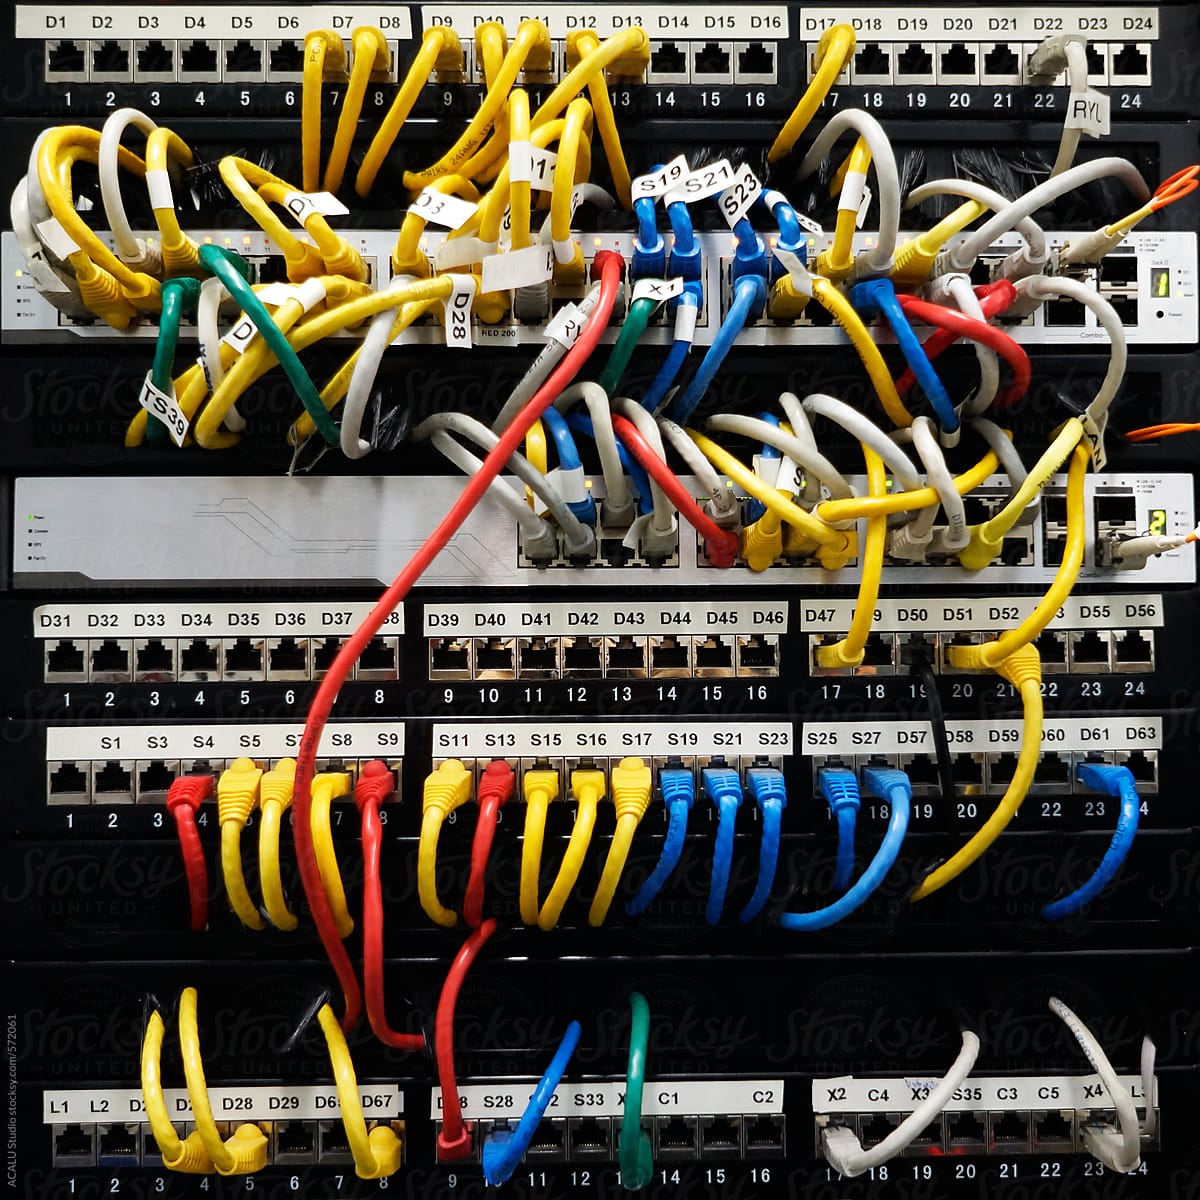 Telecommunication rack with colored network cables